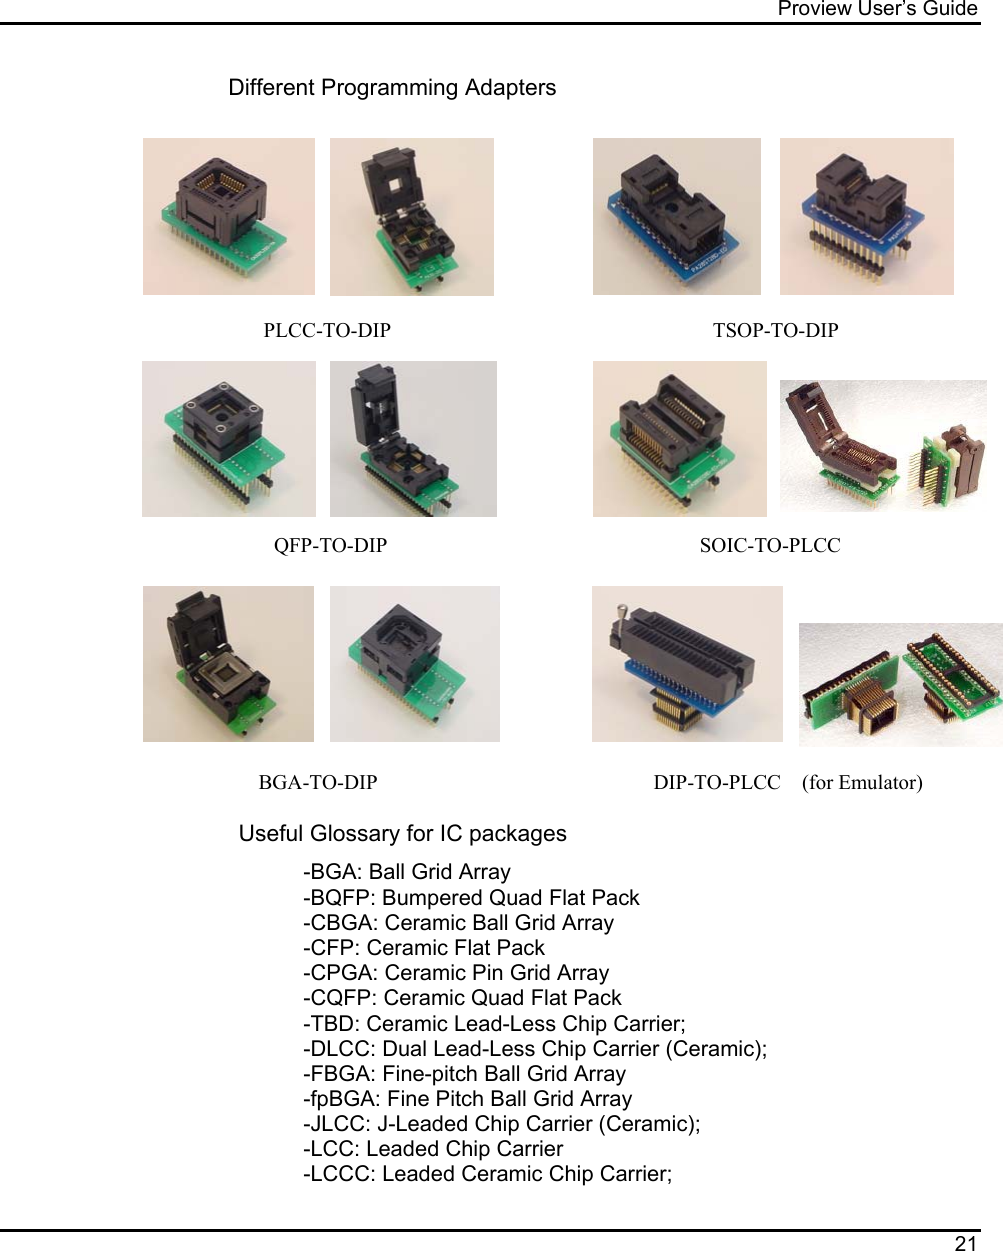 Proview User’s Guide  21  Different Programming Adapters                                                                            PLCC-TO-DIP                           TSOP-TO-DIP                                                             QFP-T                                                         QFP-TO-DIP                                                            SOIC-TO-PLCC                 BGA-TO-DIP                                                     DIP-TO-PLCC    (for Emulator)  Useful Glossary for IC packages -BGA: Ball Grid Array -BQFP: Bumpered Quad Flat Pack -CBGA: Ceramic Ball Grid Array -CFP: Ceramic Flat Pack -CPGA: Ceramic Pin Grid Array  -CQFP: Ceramic Quad Flat Pack -TBD: Ceramic Lead-Less Chip Carrier; -DLCC: Dual Lead-Less Chip Carrier (Ceramic); -FBGA: Fine-pitch Ball Grid Array -fpBGA: Fine Pitch Ball Grid Array -JLCC: J-Leaded Chip Carrier (Ceramic); -LCC: Leaded Chip Carrier -LCCC: Leaded Ceramic Chip Carrier; 